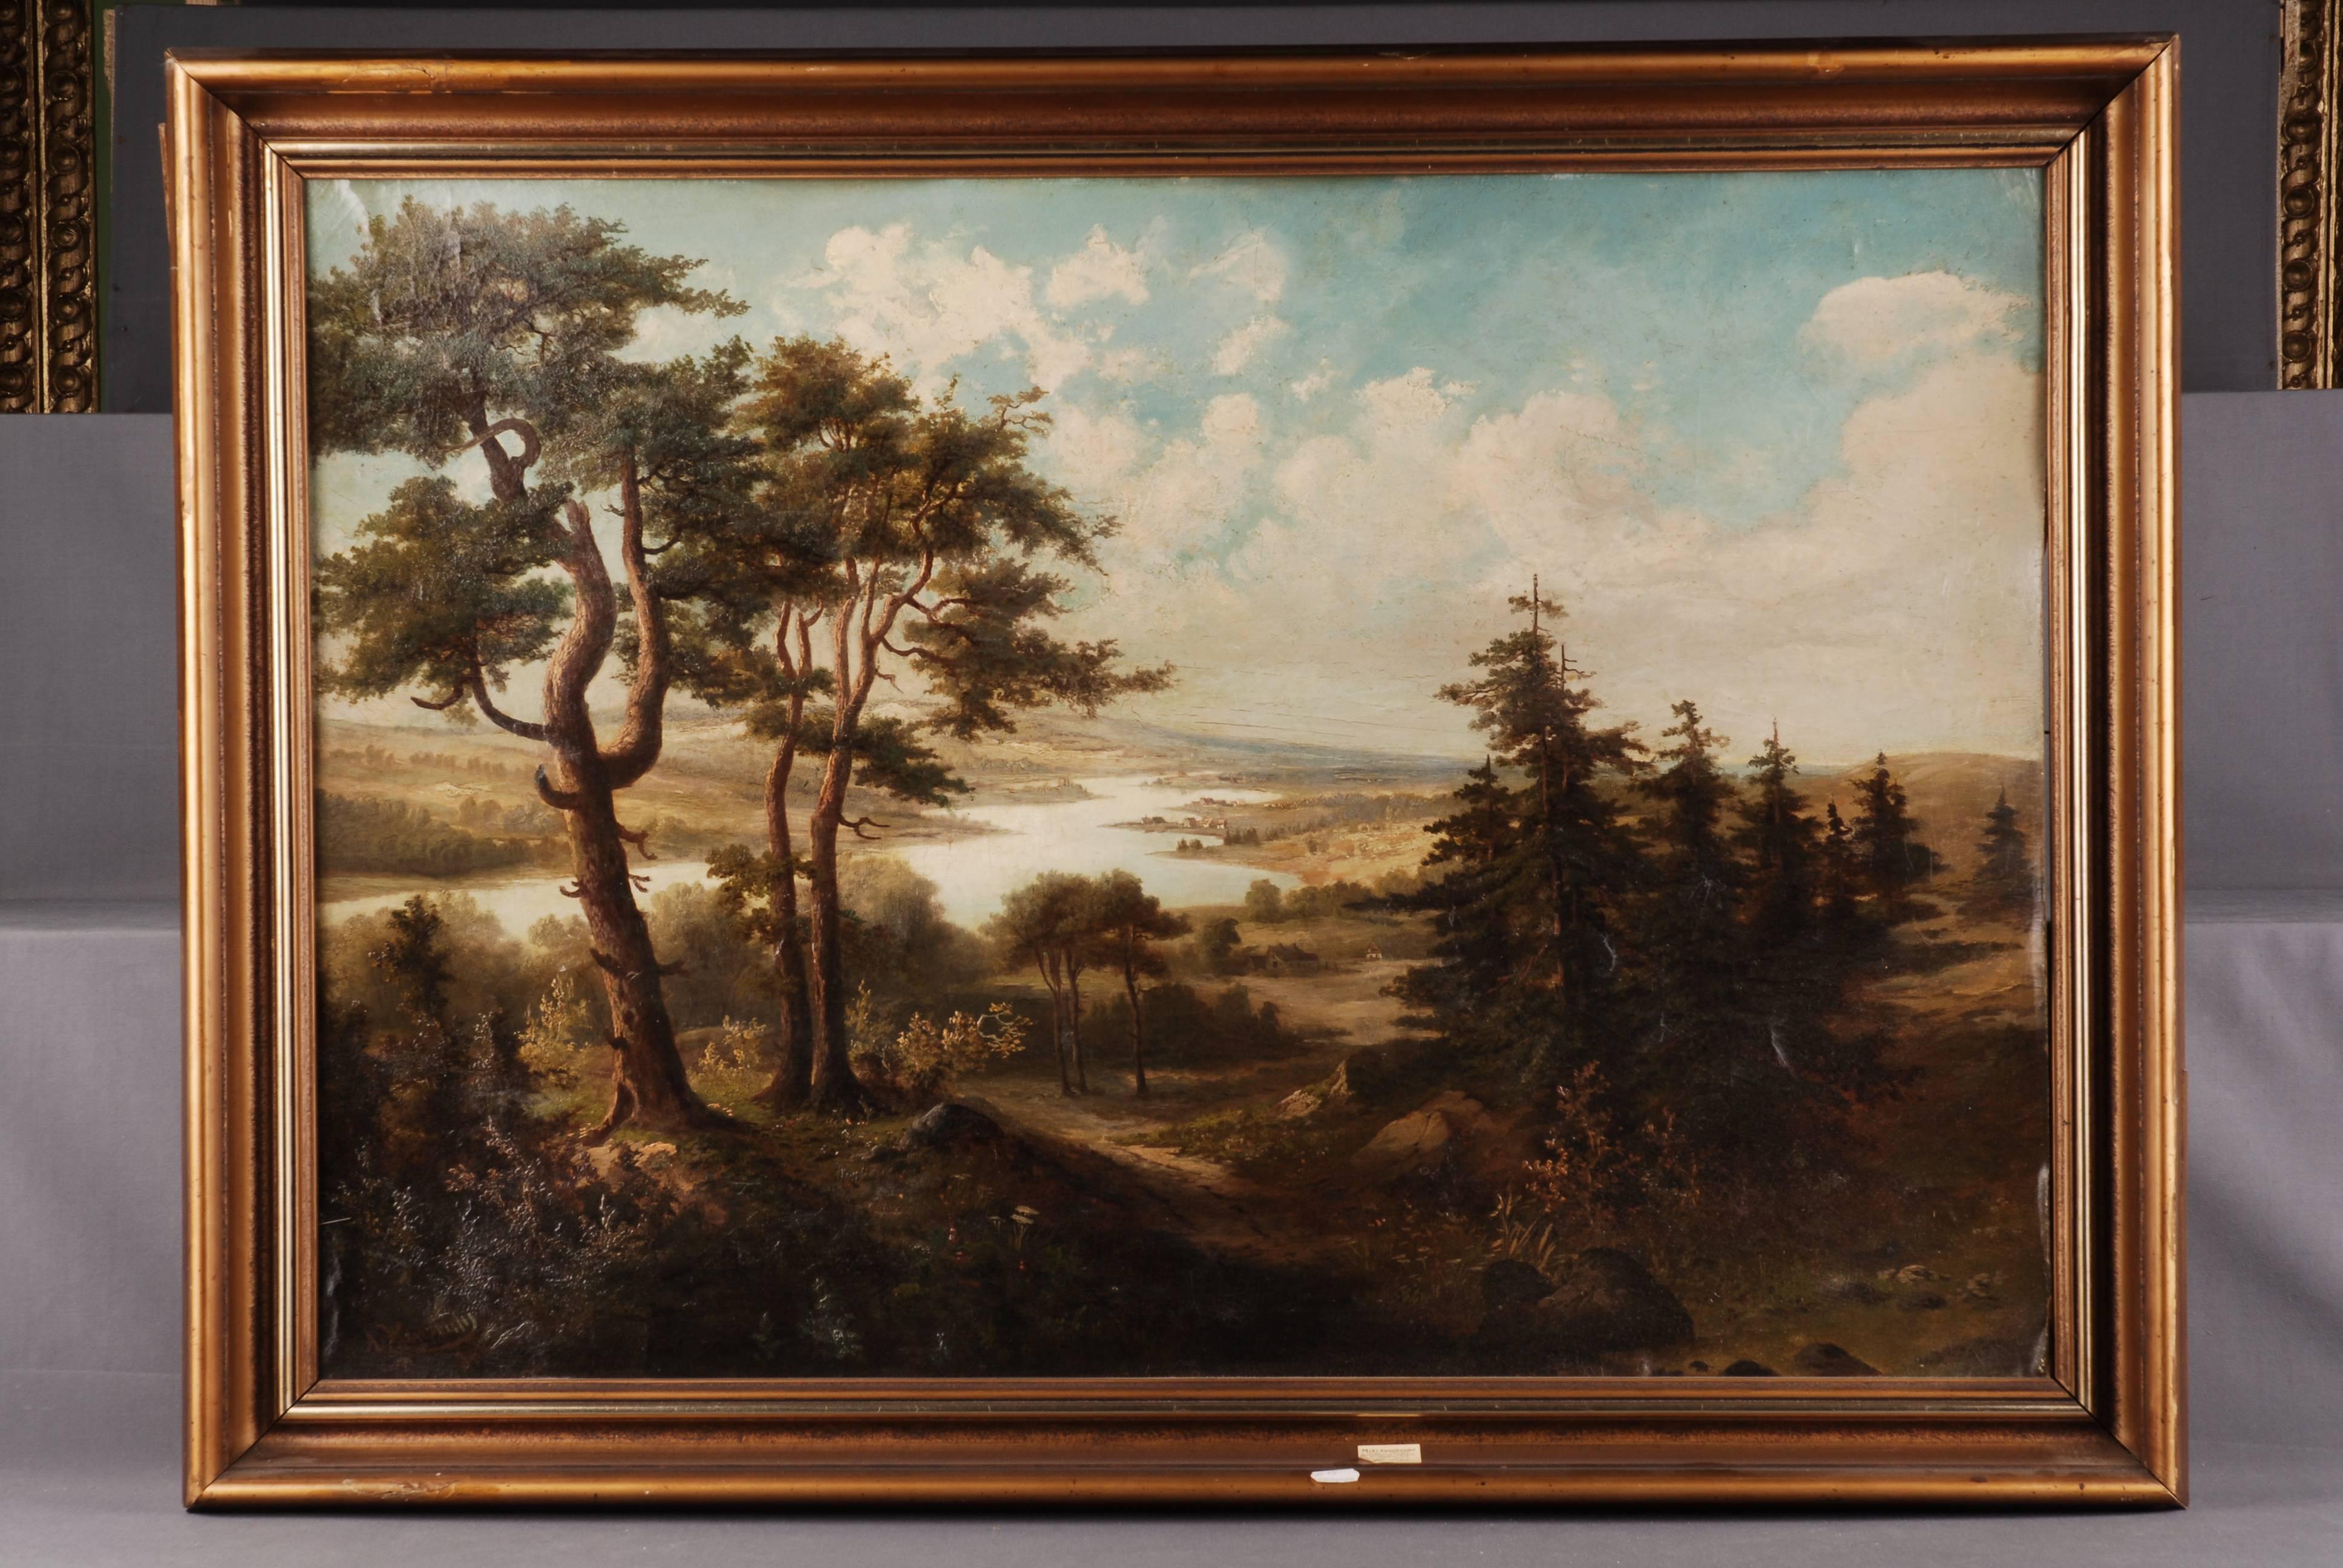 Oil on canvas, view from a mountain range with pines and fir trees on a flat river or lake landscape with farmsteads.

(S-108).